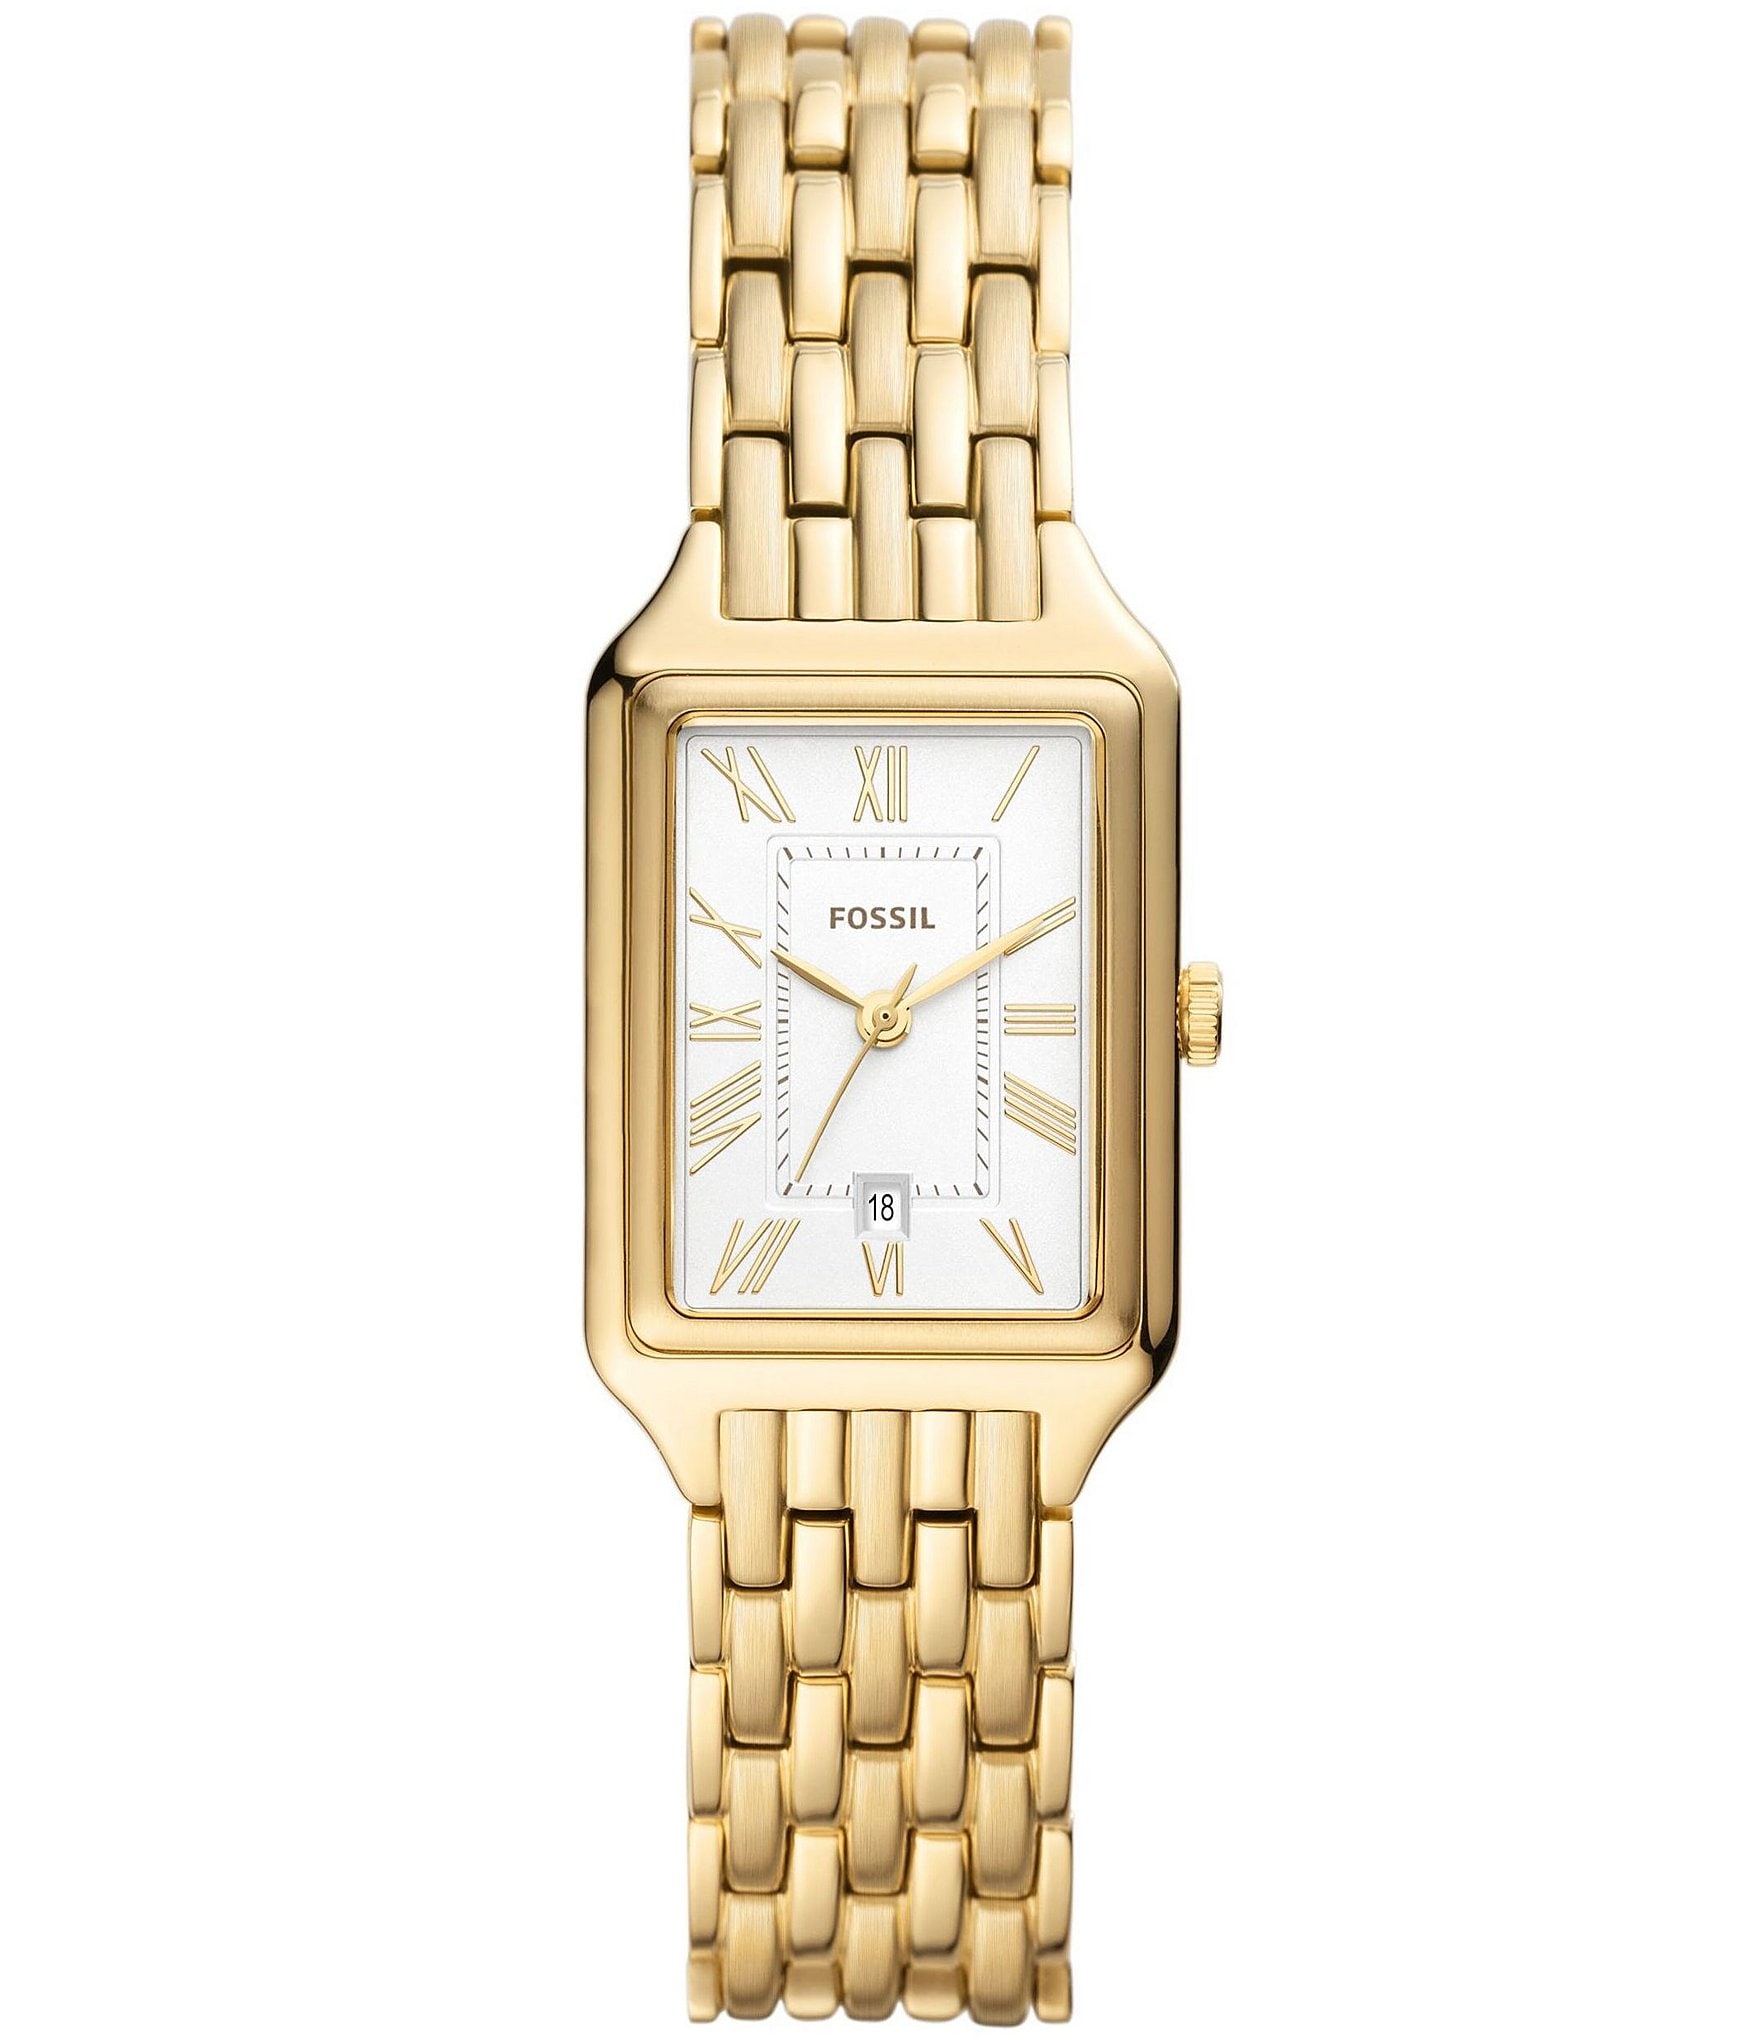 Casio MTP-1170N-9A Gold Plated Watch for Men and Women |-sonthuy.vn